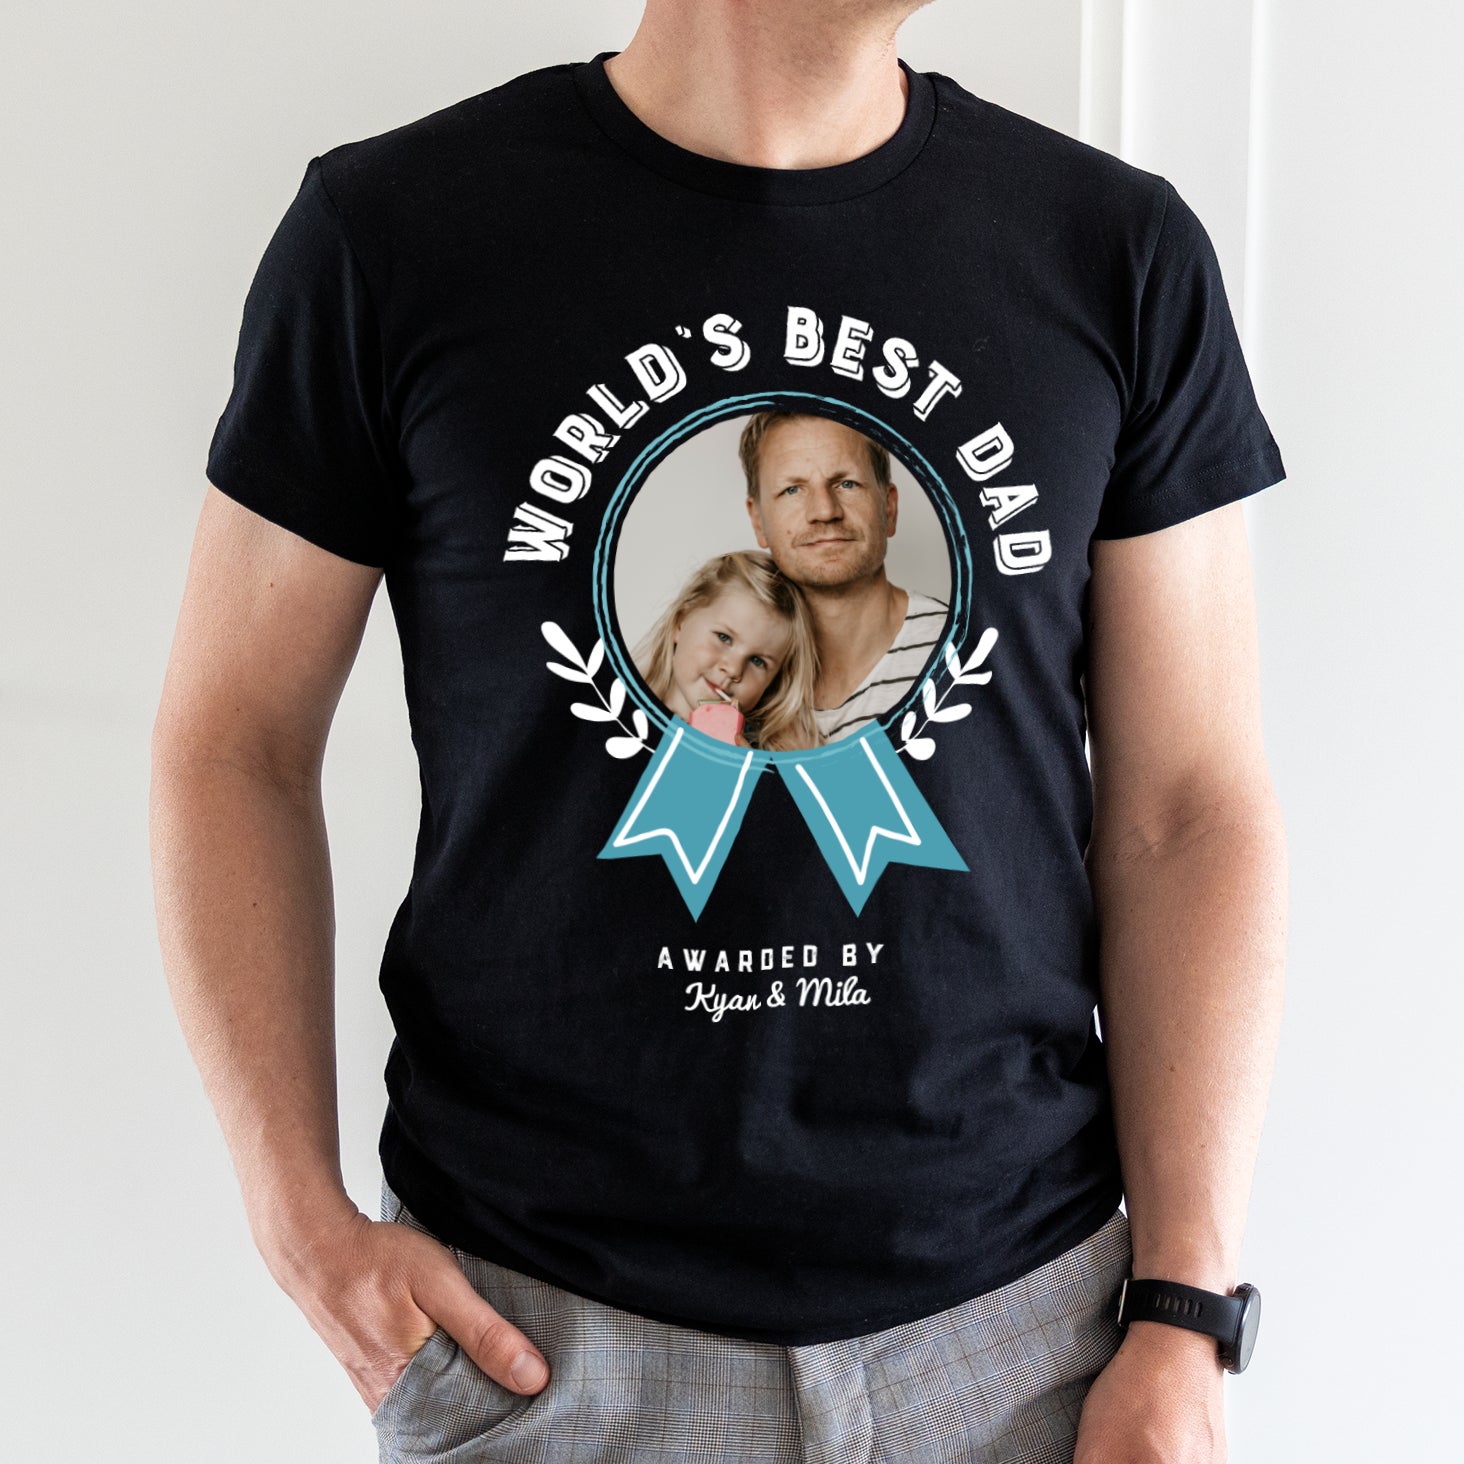 Personalised t-shirt - Father's Day - Black - S